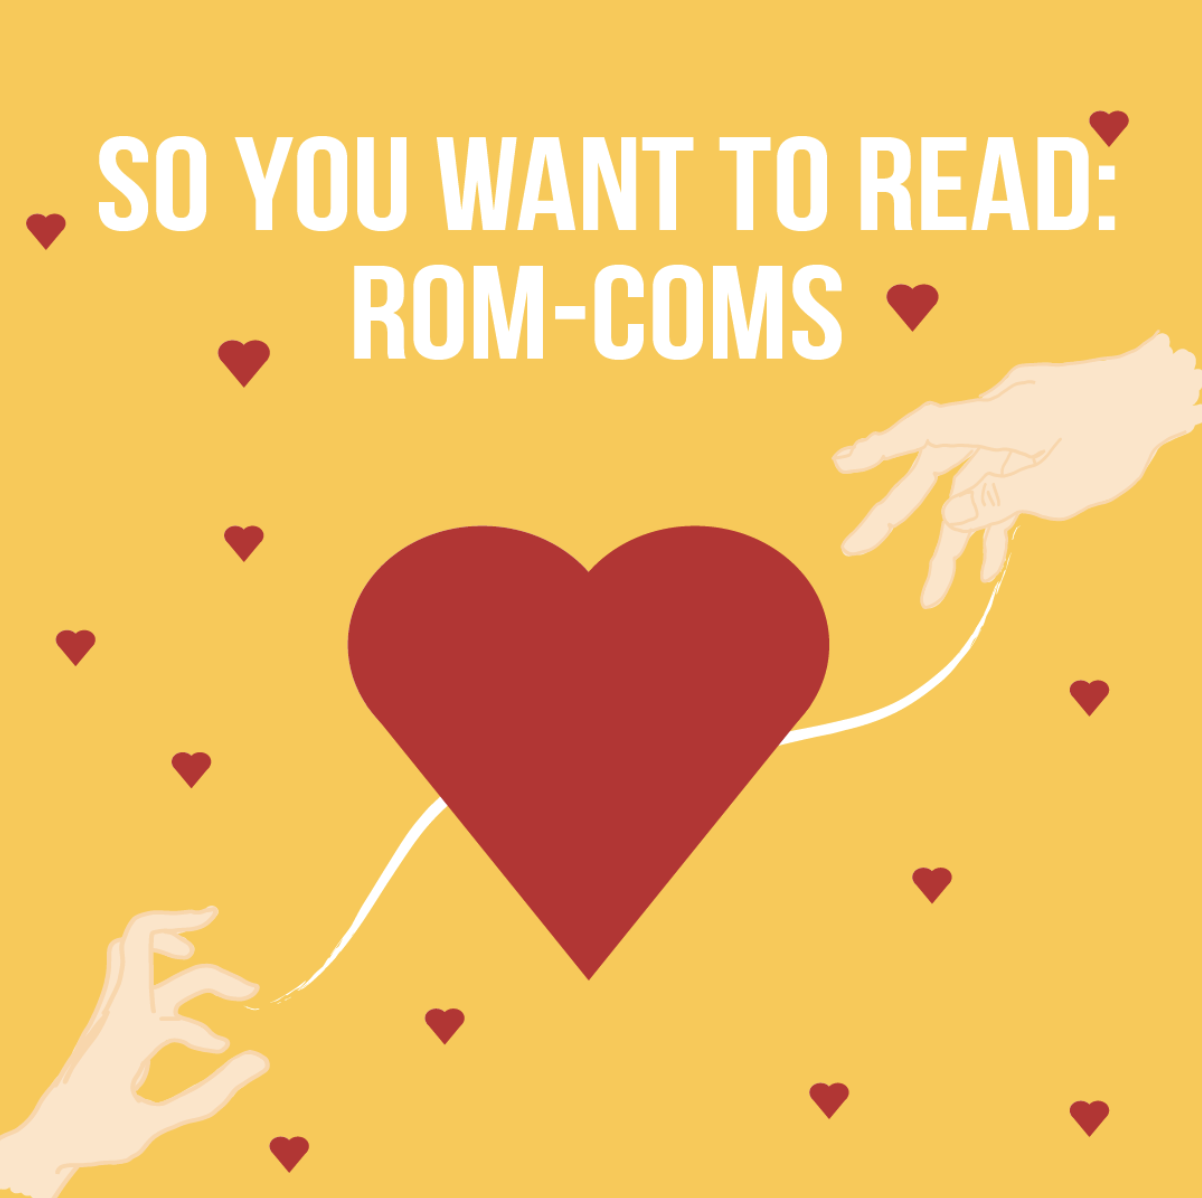 So You Want to Read Rom-Coms